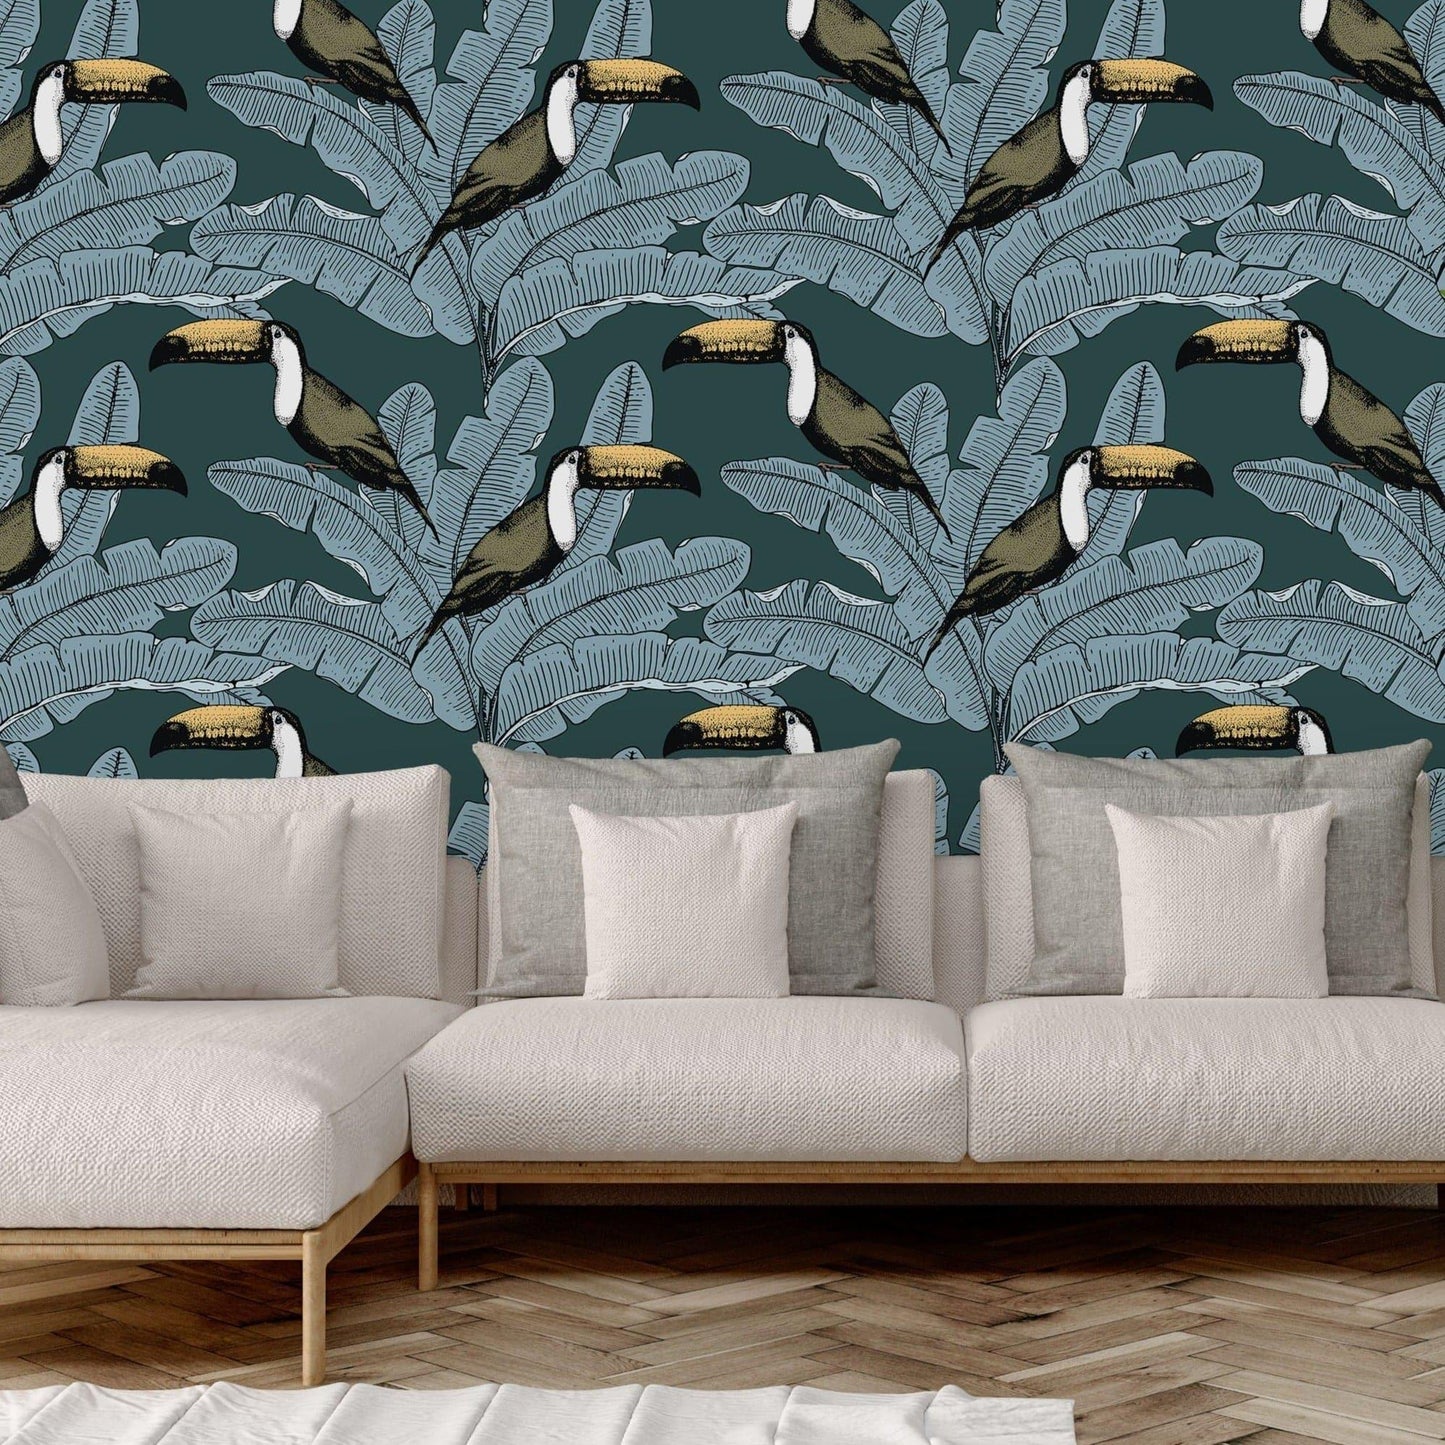 Watercolor Sea World Ocean Fish Turtle Dolphin Jellyfish Wall Mural Tropical Toucan Palm Leaves Removable Wallpaper 